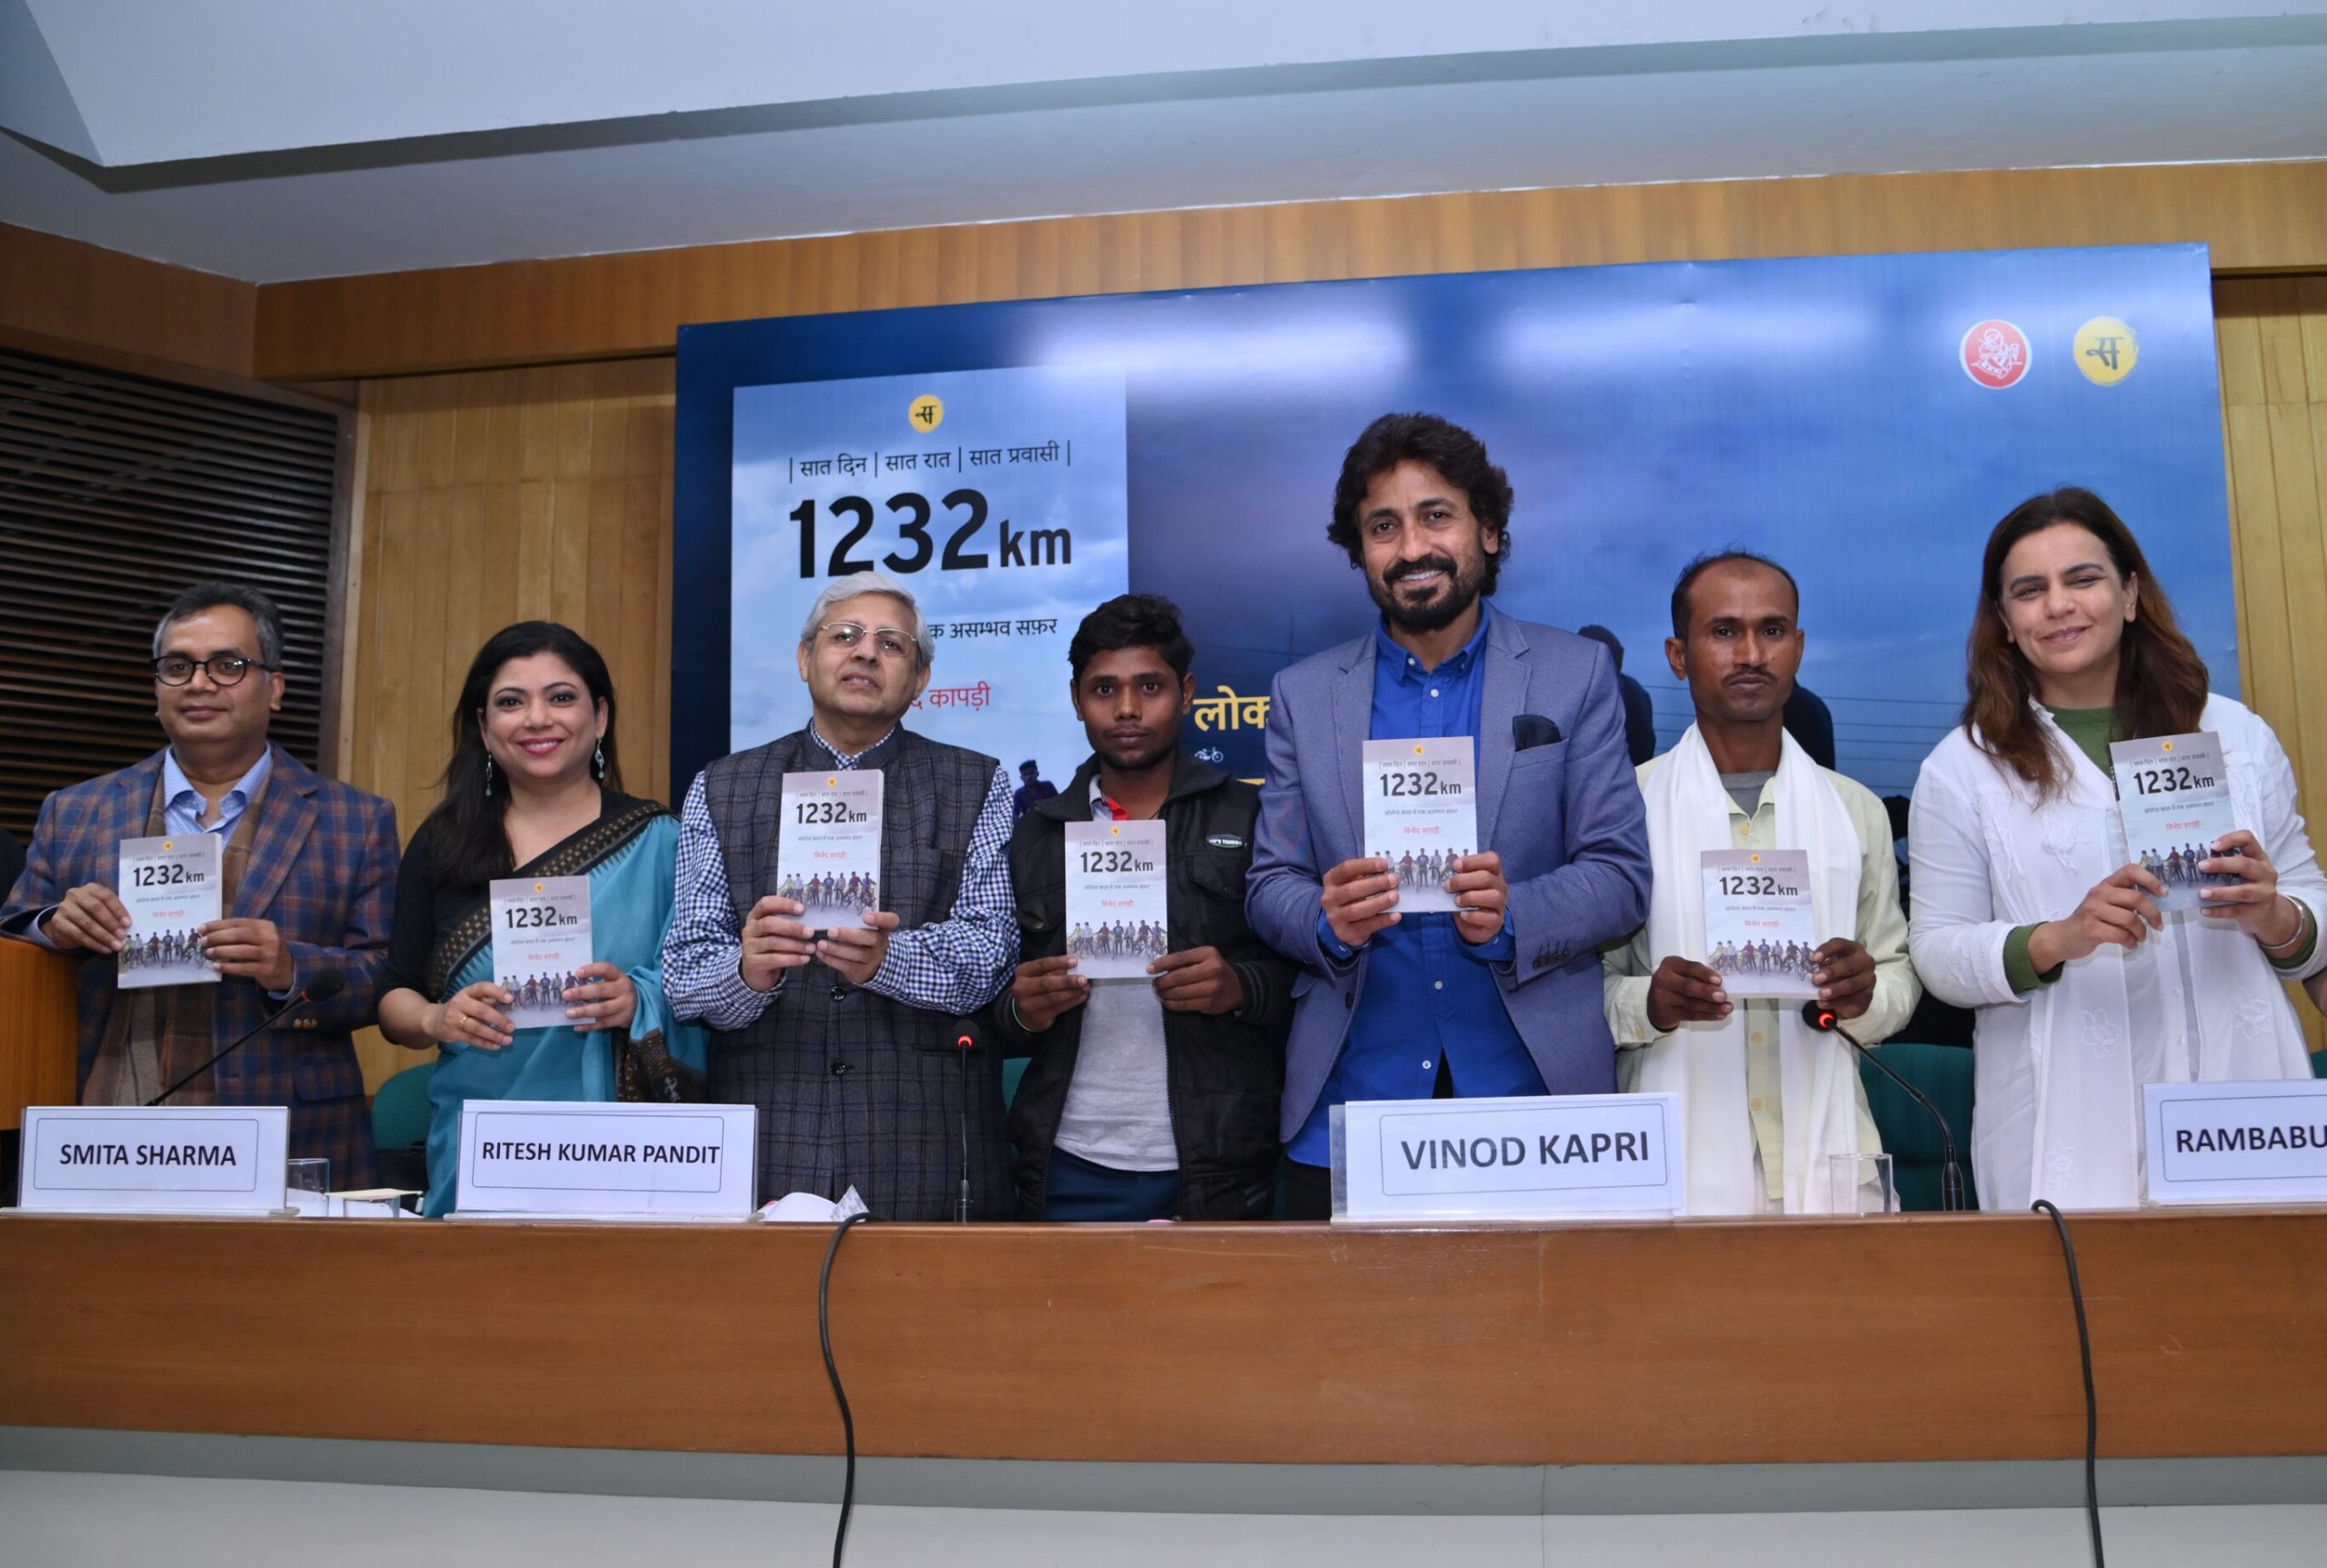 You are currently viewing 1232 KM: Corona Kaal Mein Ek Asambhav Safar by Author Vinod Kapri launched